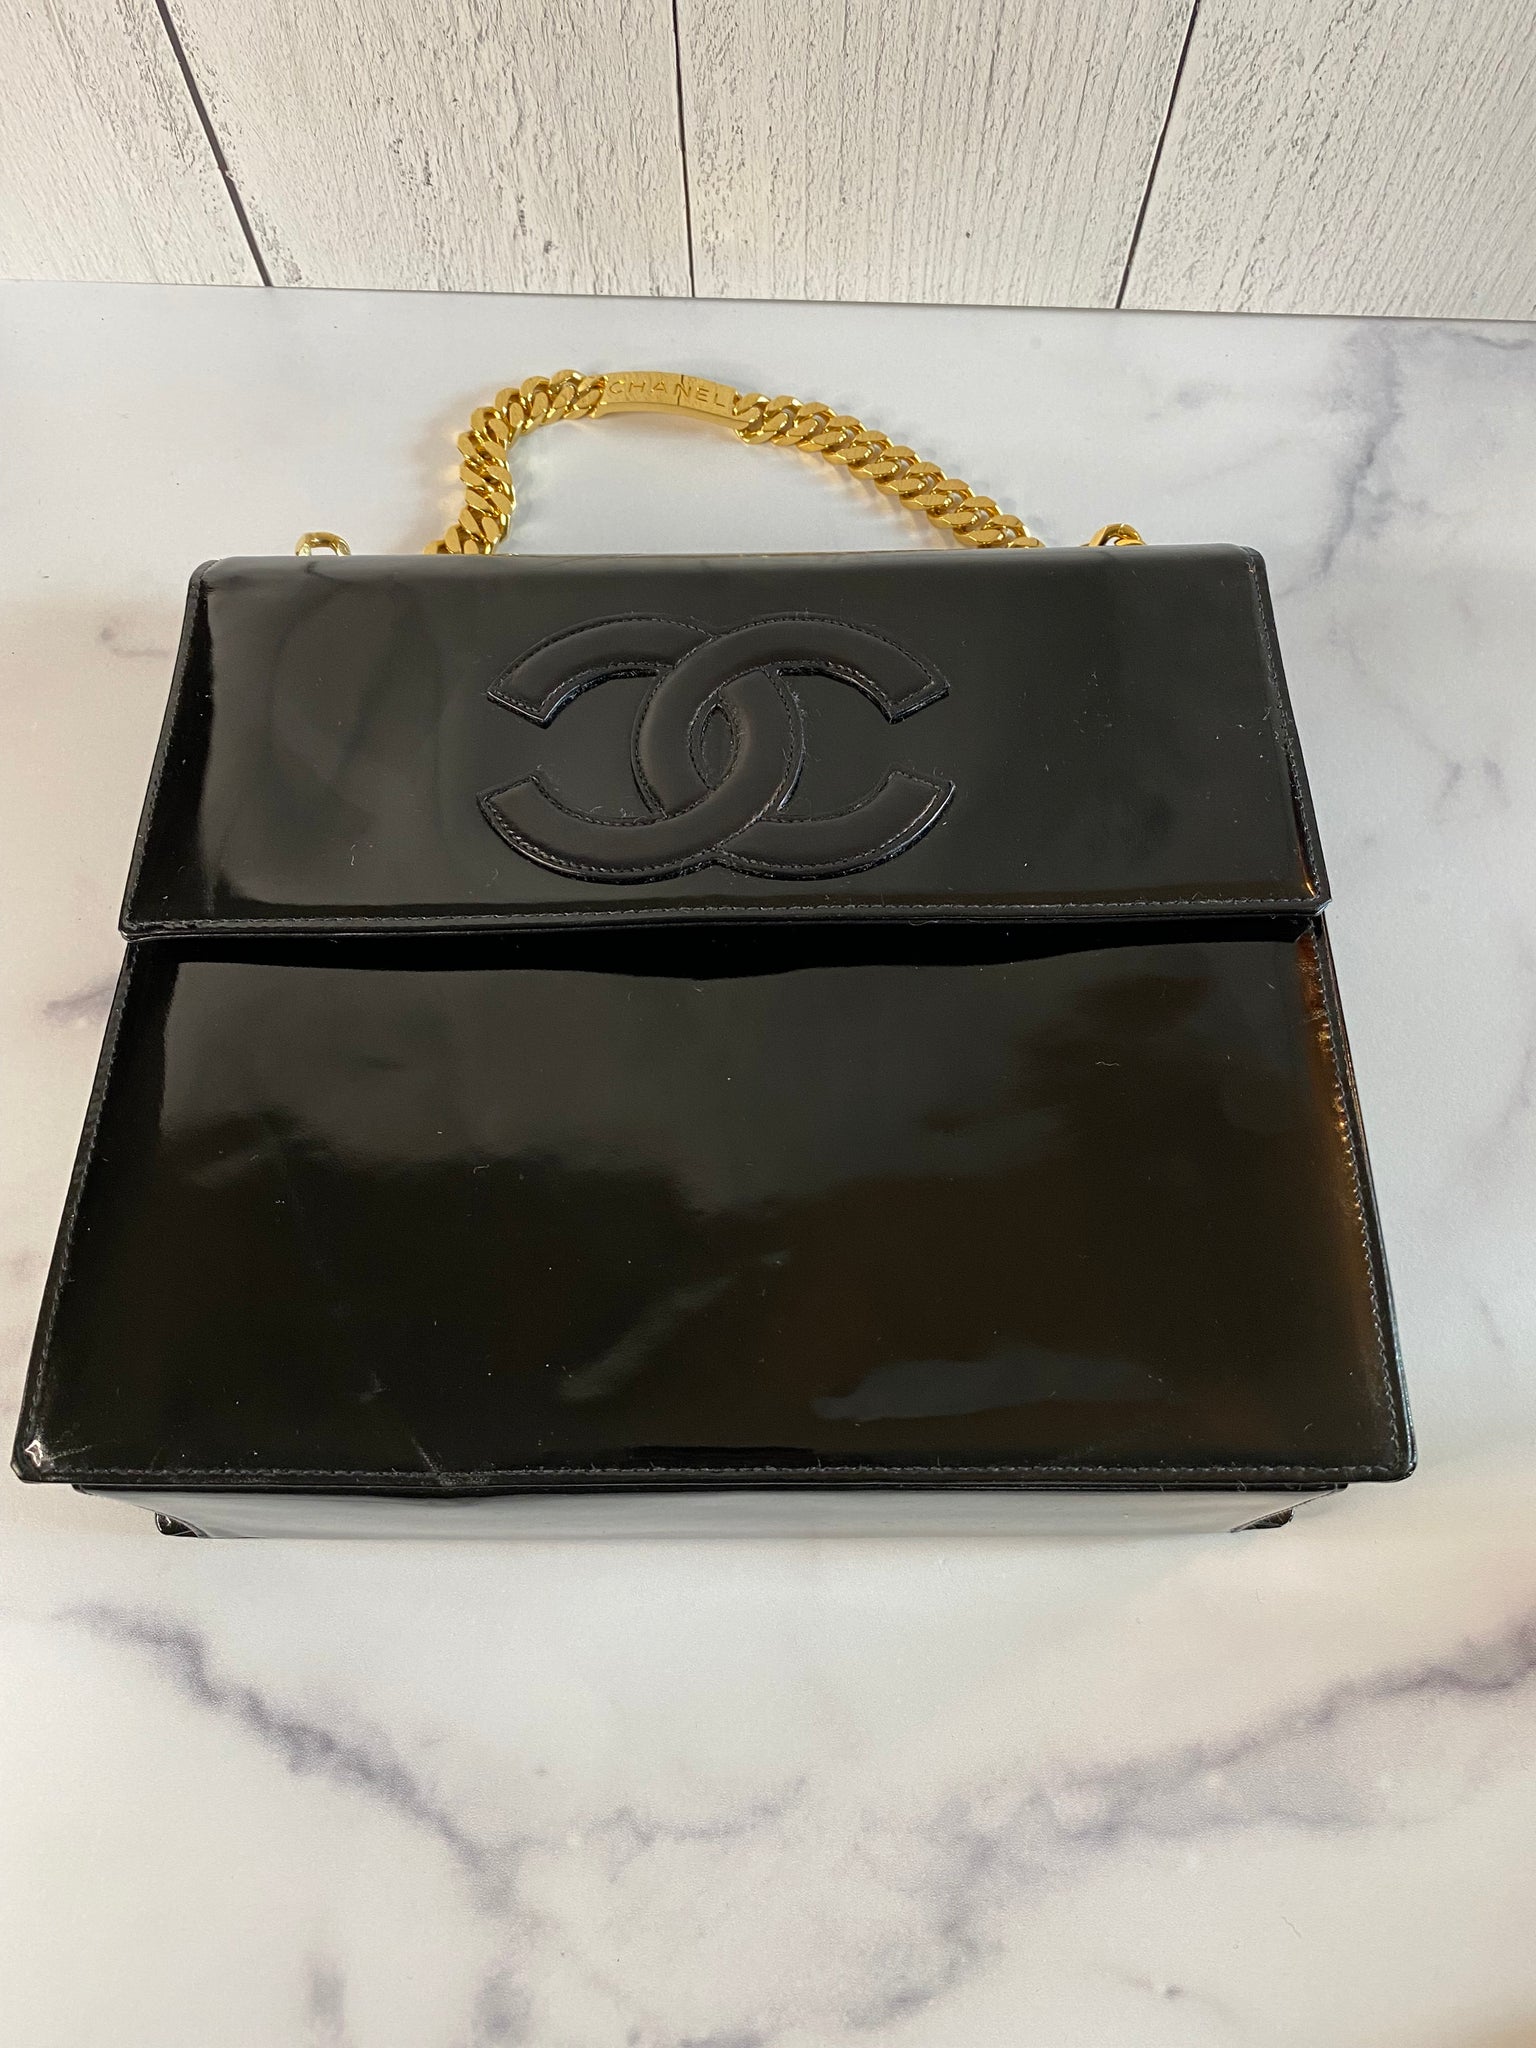 Chanel Classic Double Flap Bag for sale